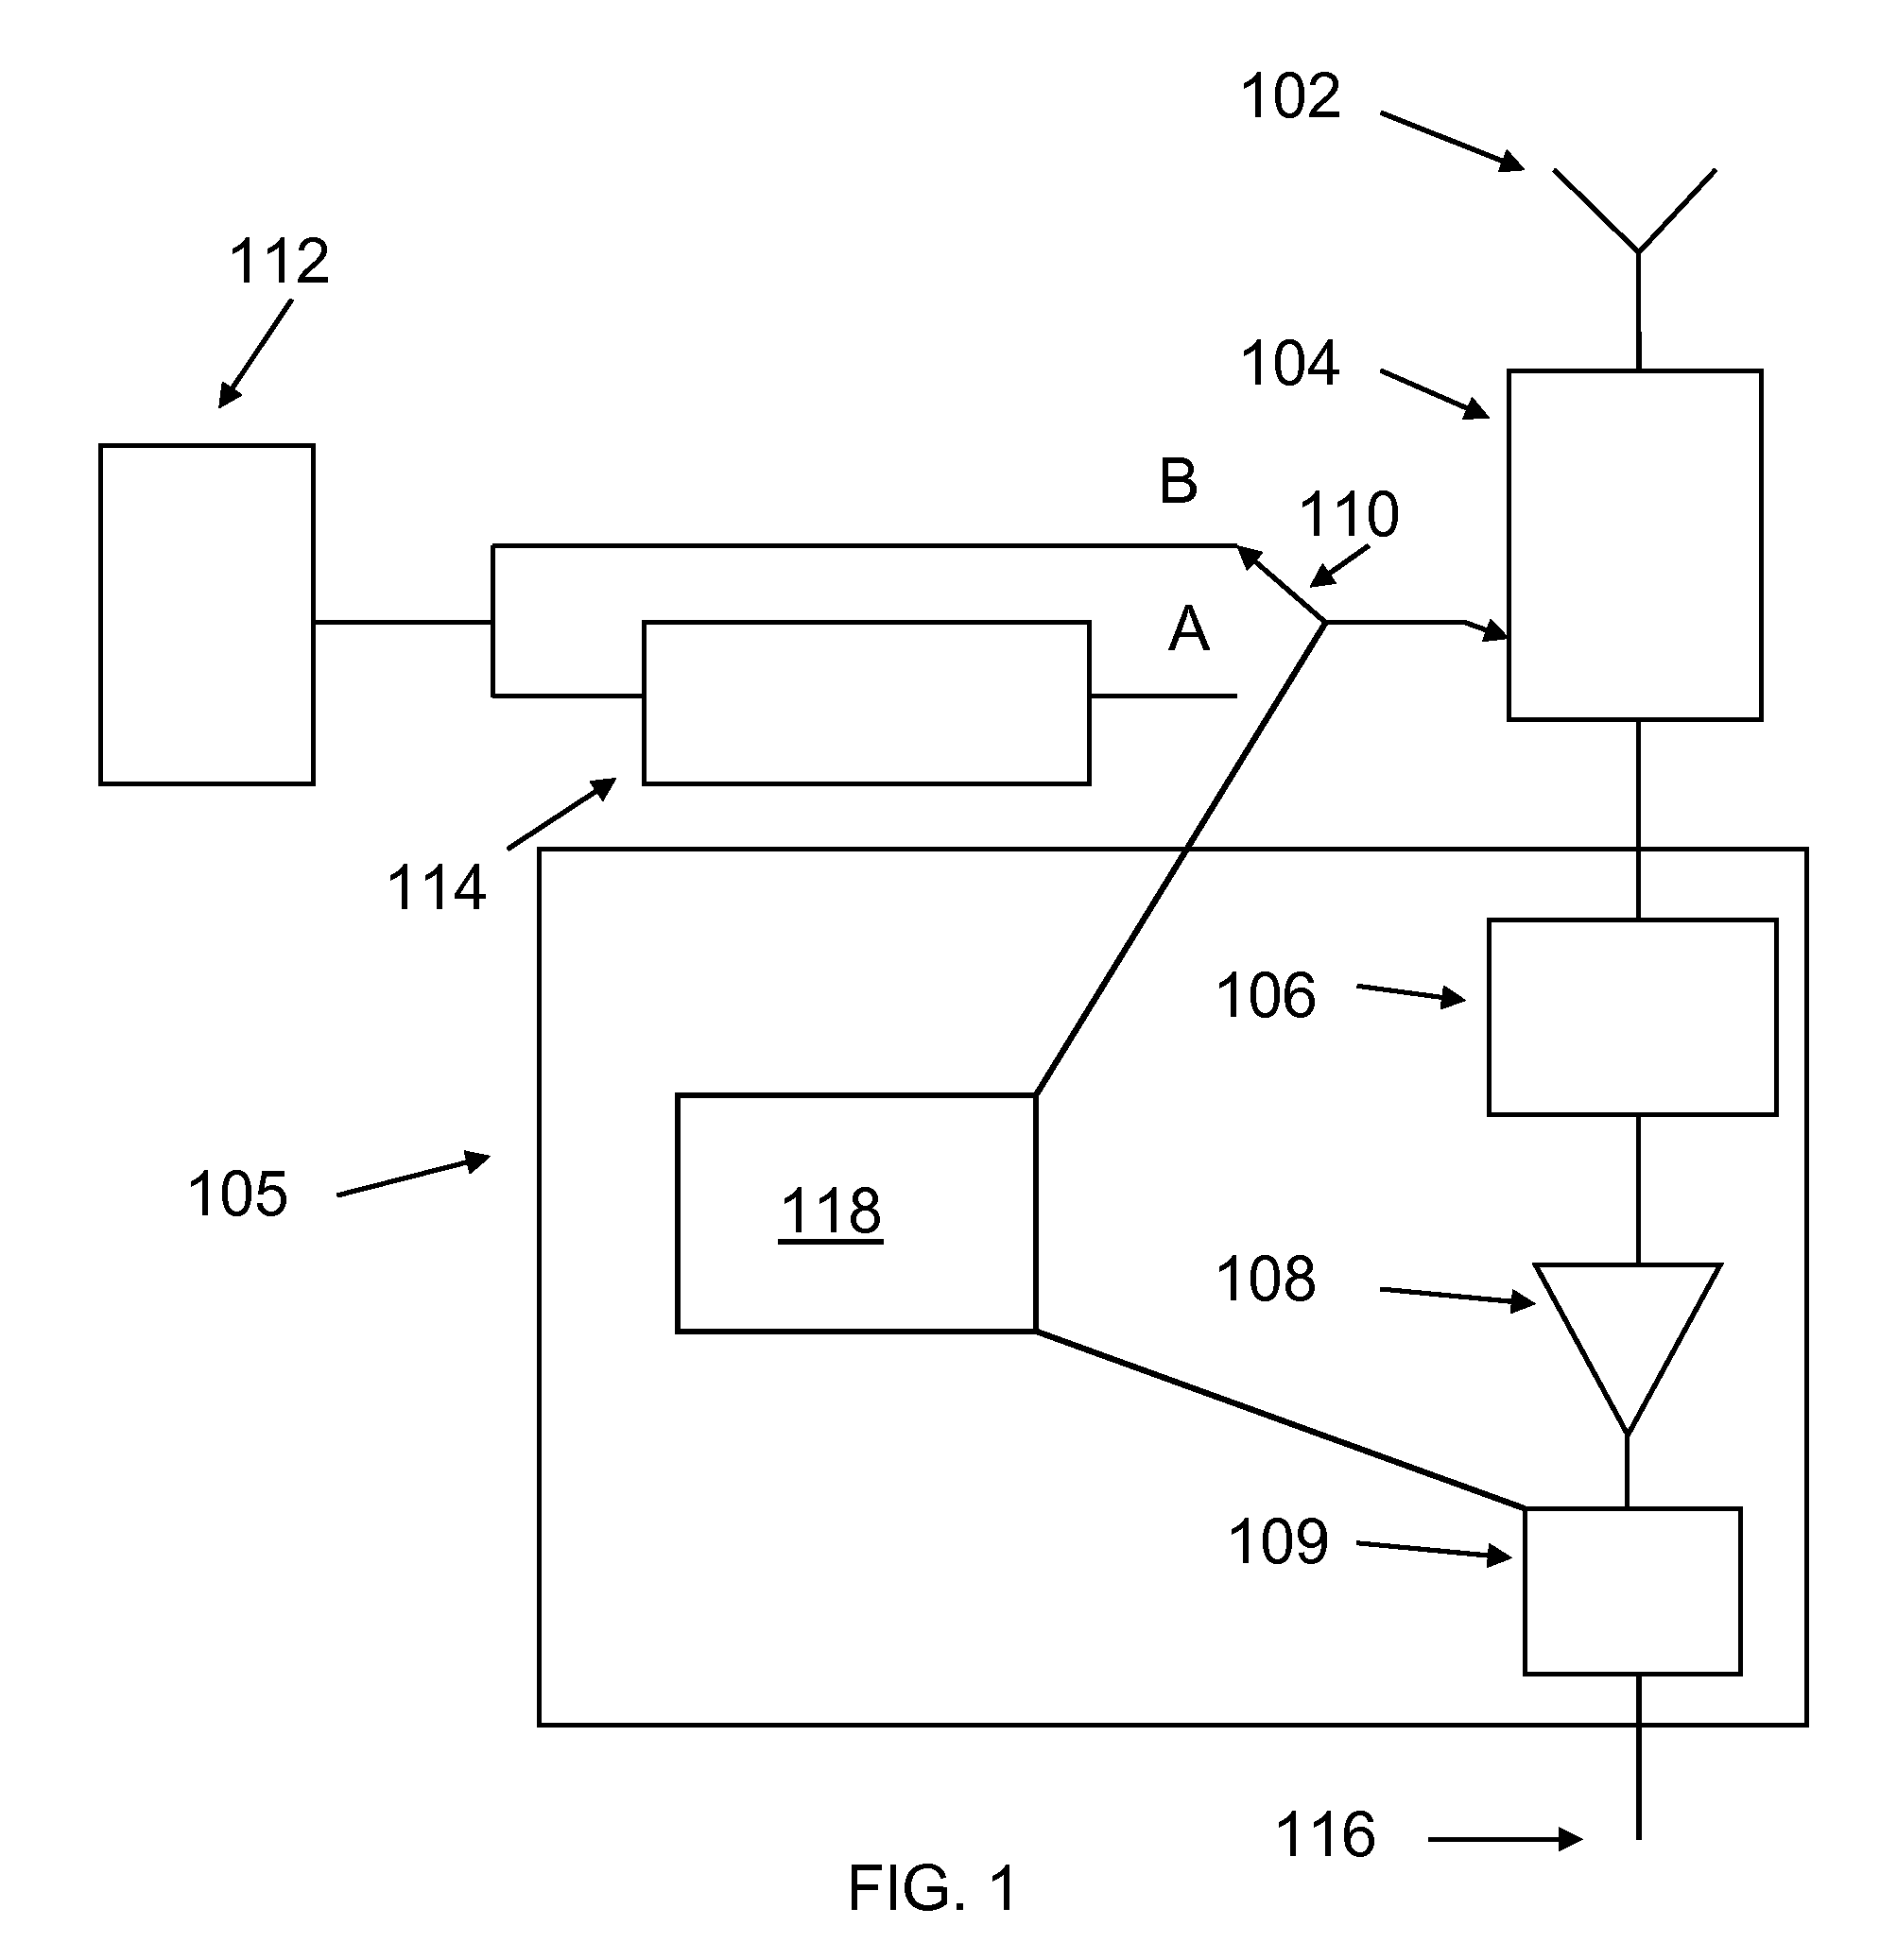 Method to measure total noise temperature of a wireless receiver during operation